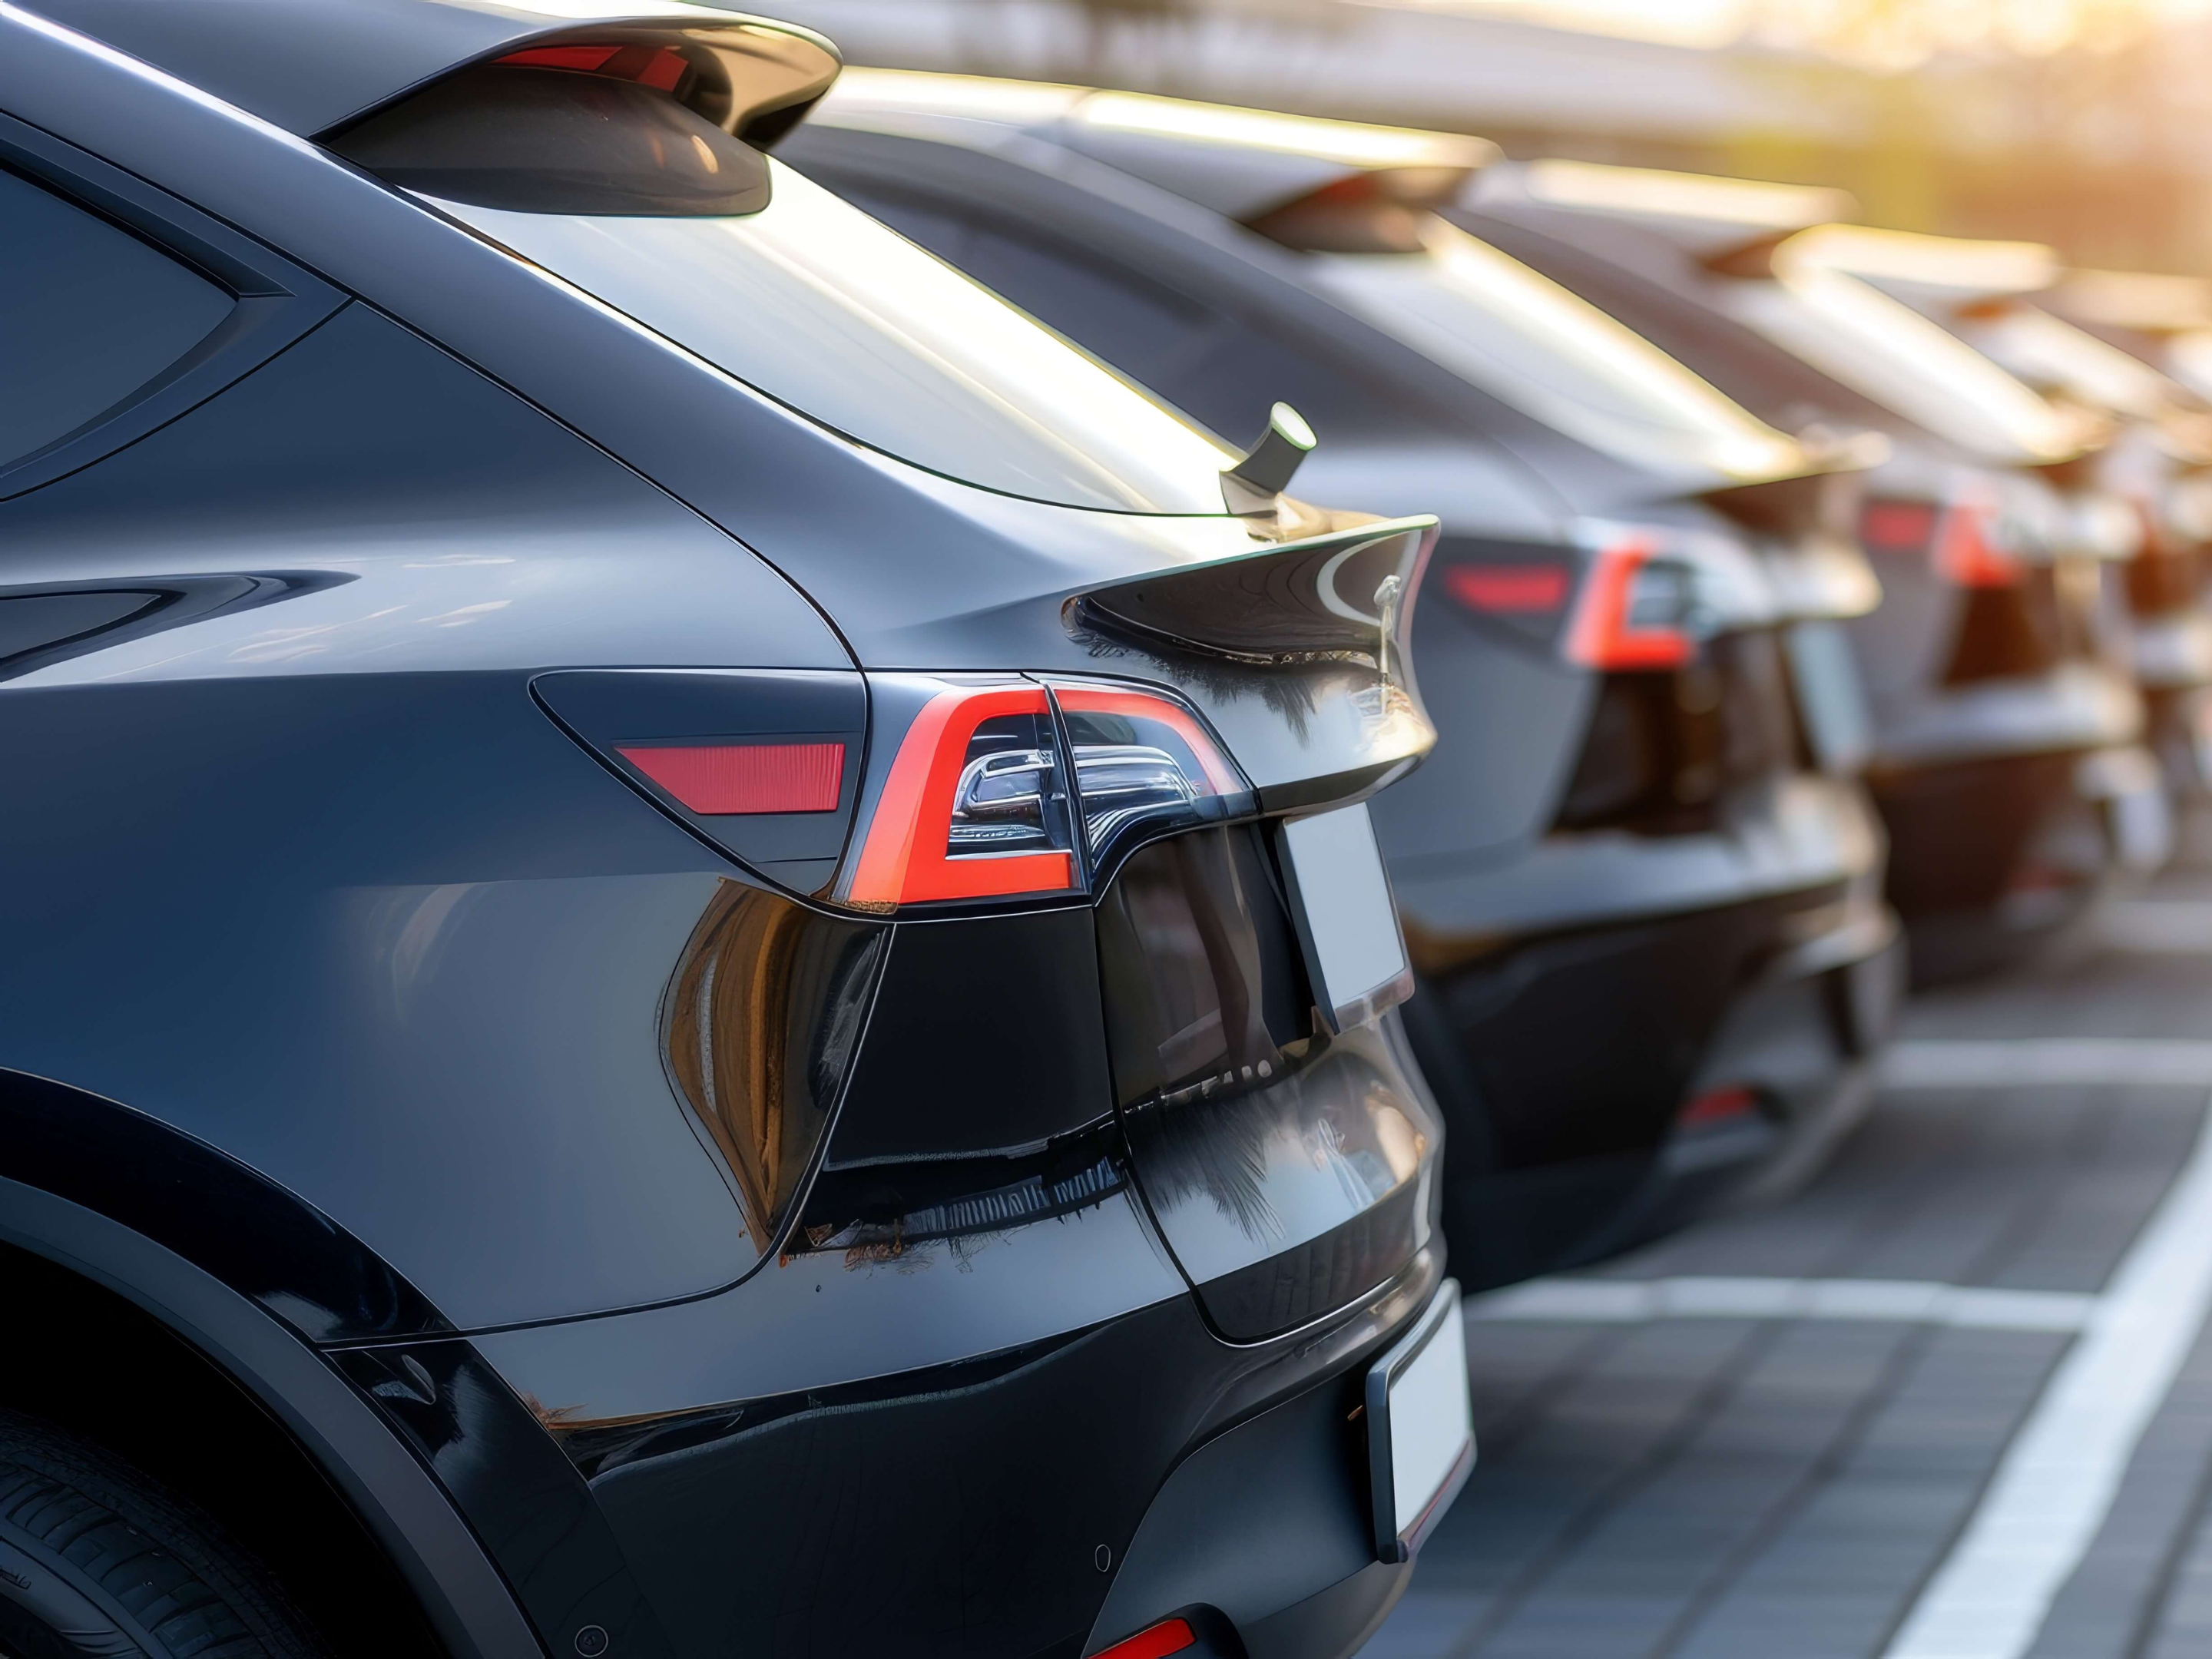 Increase conversions in automotive leasing and fleet management 